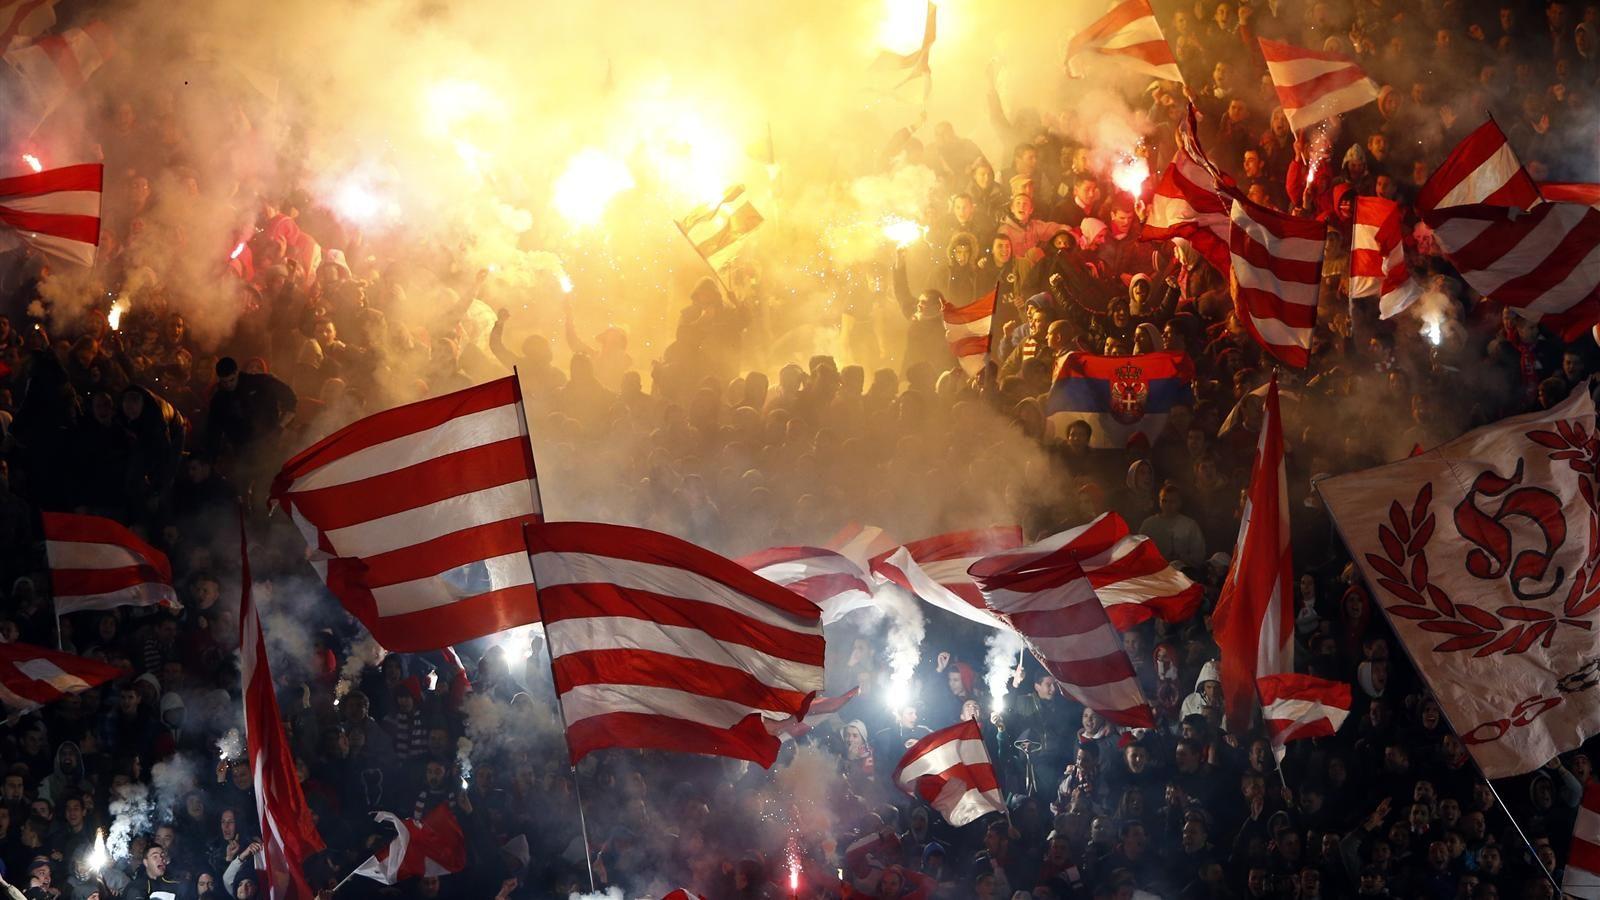 UEFA bans Red Star Belgrade from Champions League League